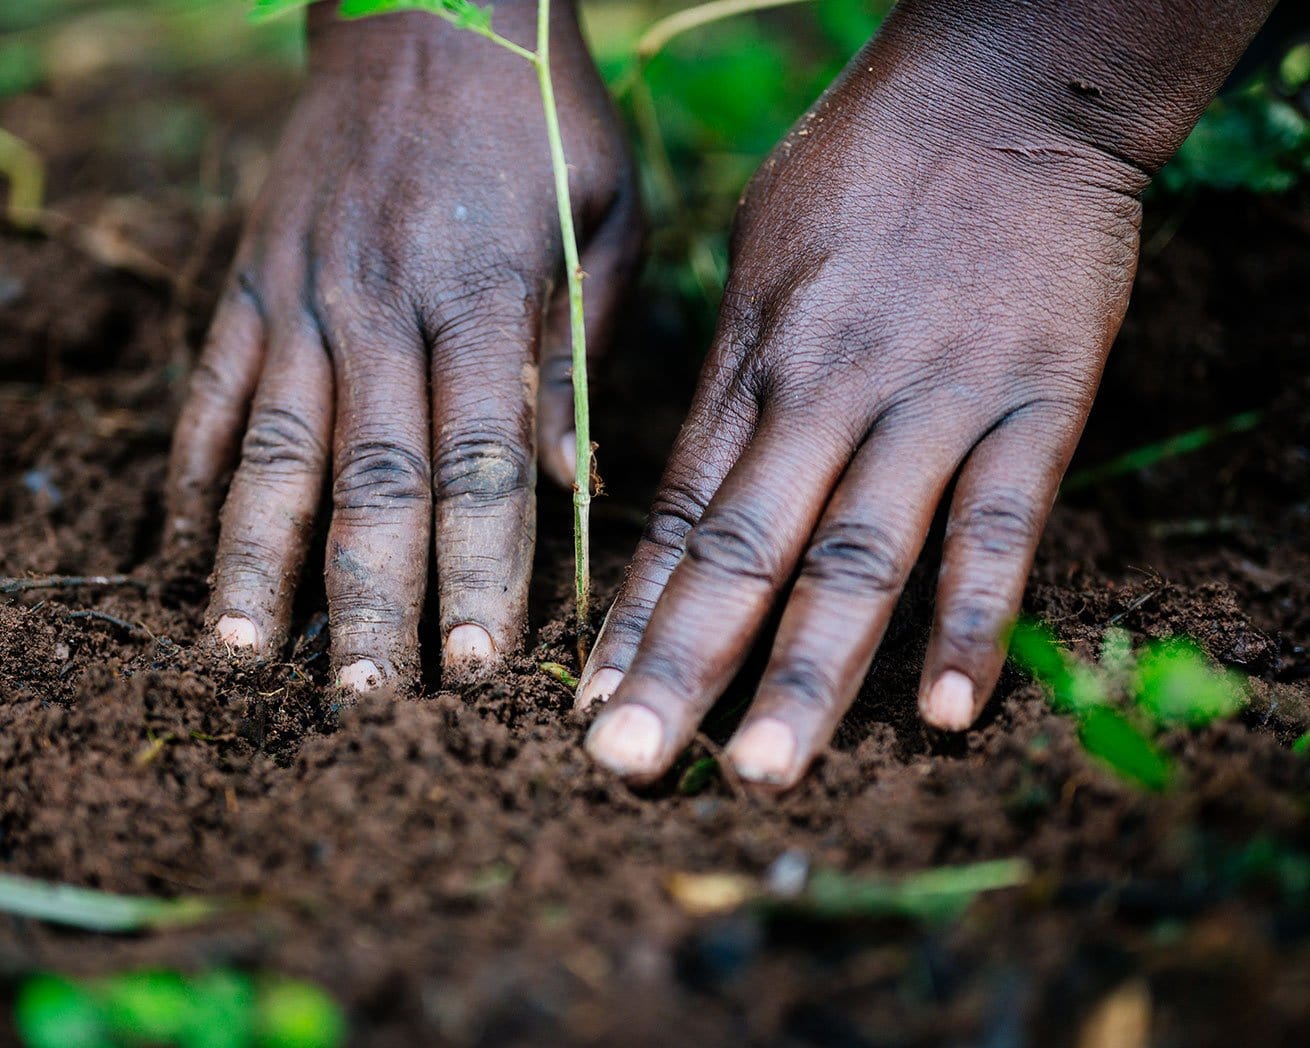 Hands in the dirt planting a sapling